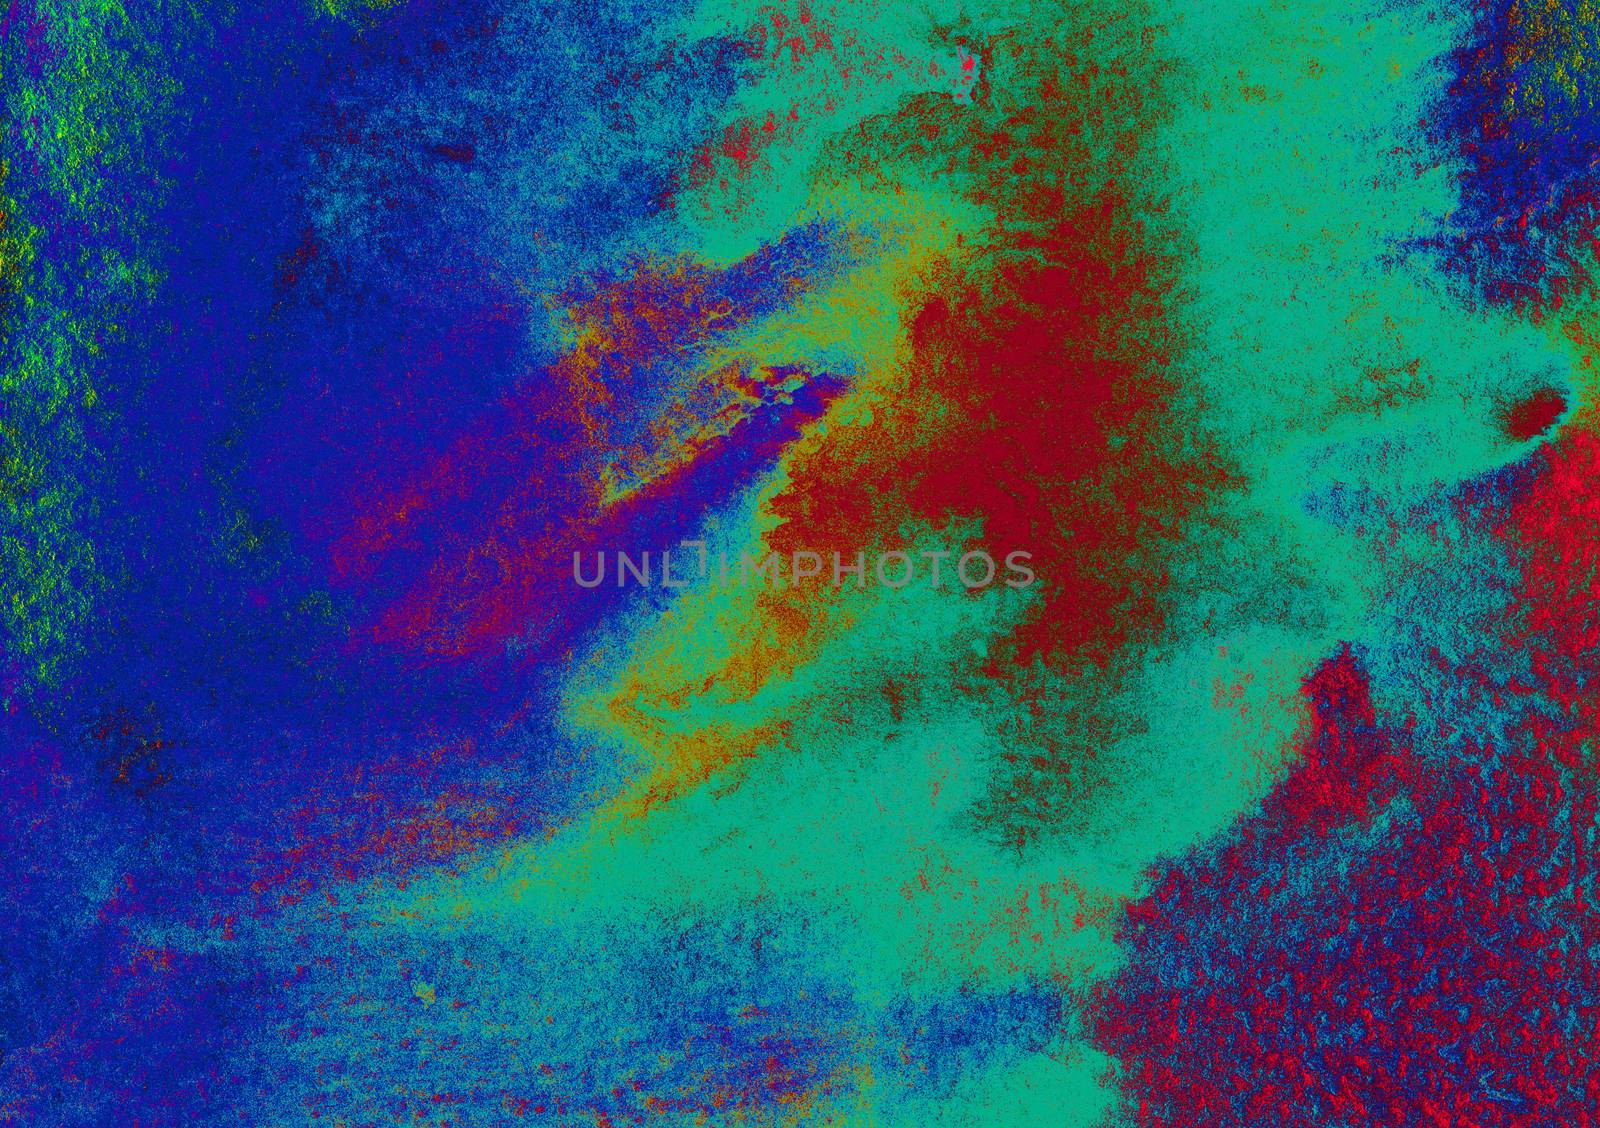 Blue green orange colors on textured paper background. Grunge vibrant painting effect pattern. Raster illustration with space for text, for media advertising website fashion concept design, banner